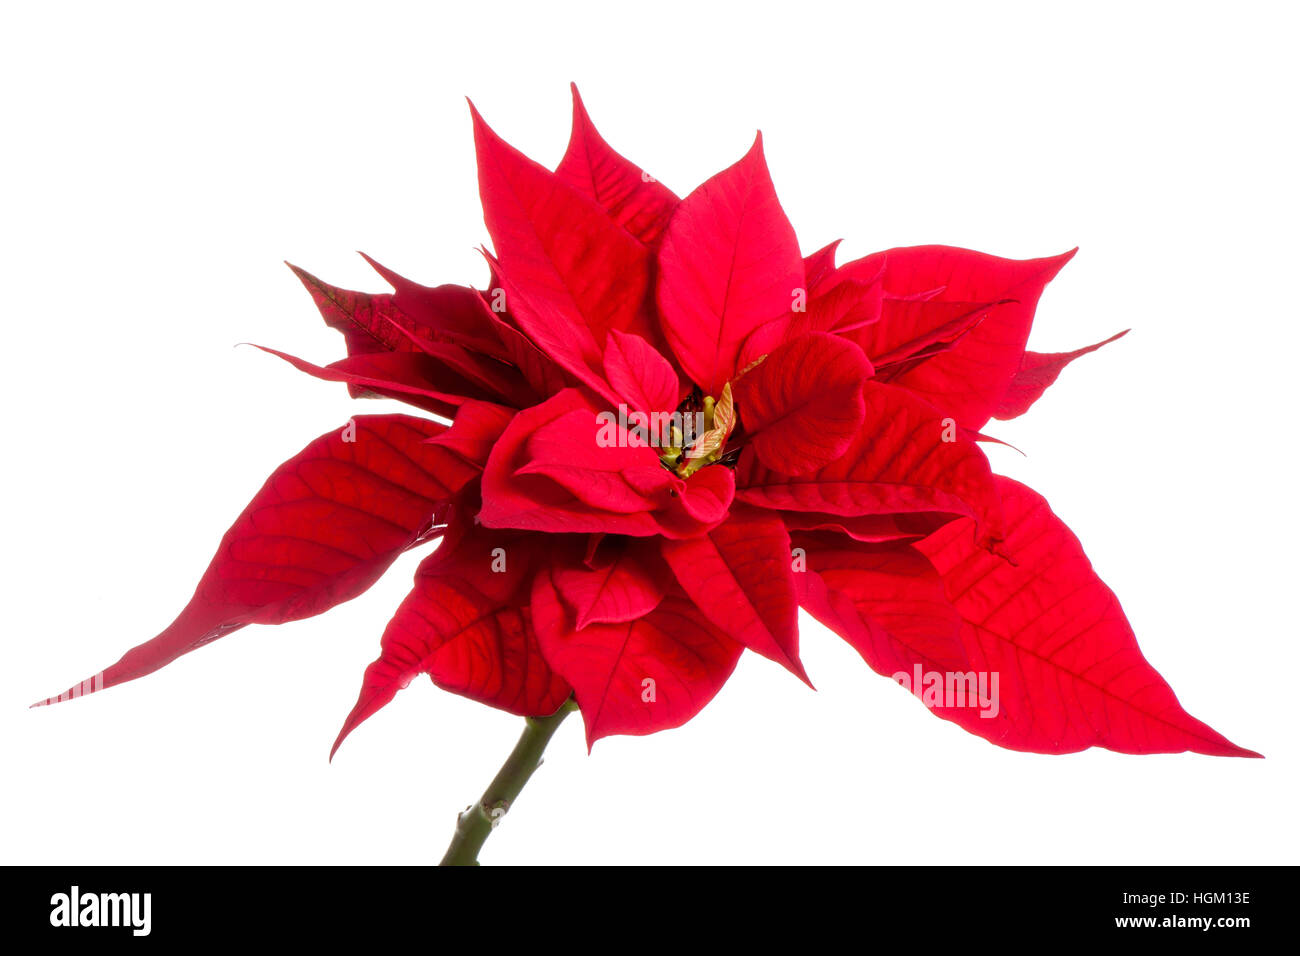 Close-up, high-key image of Vibrant Red Poinsettia bracts/leaves -  Euphorbia pulcherrima plant Stock Photo